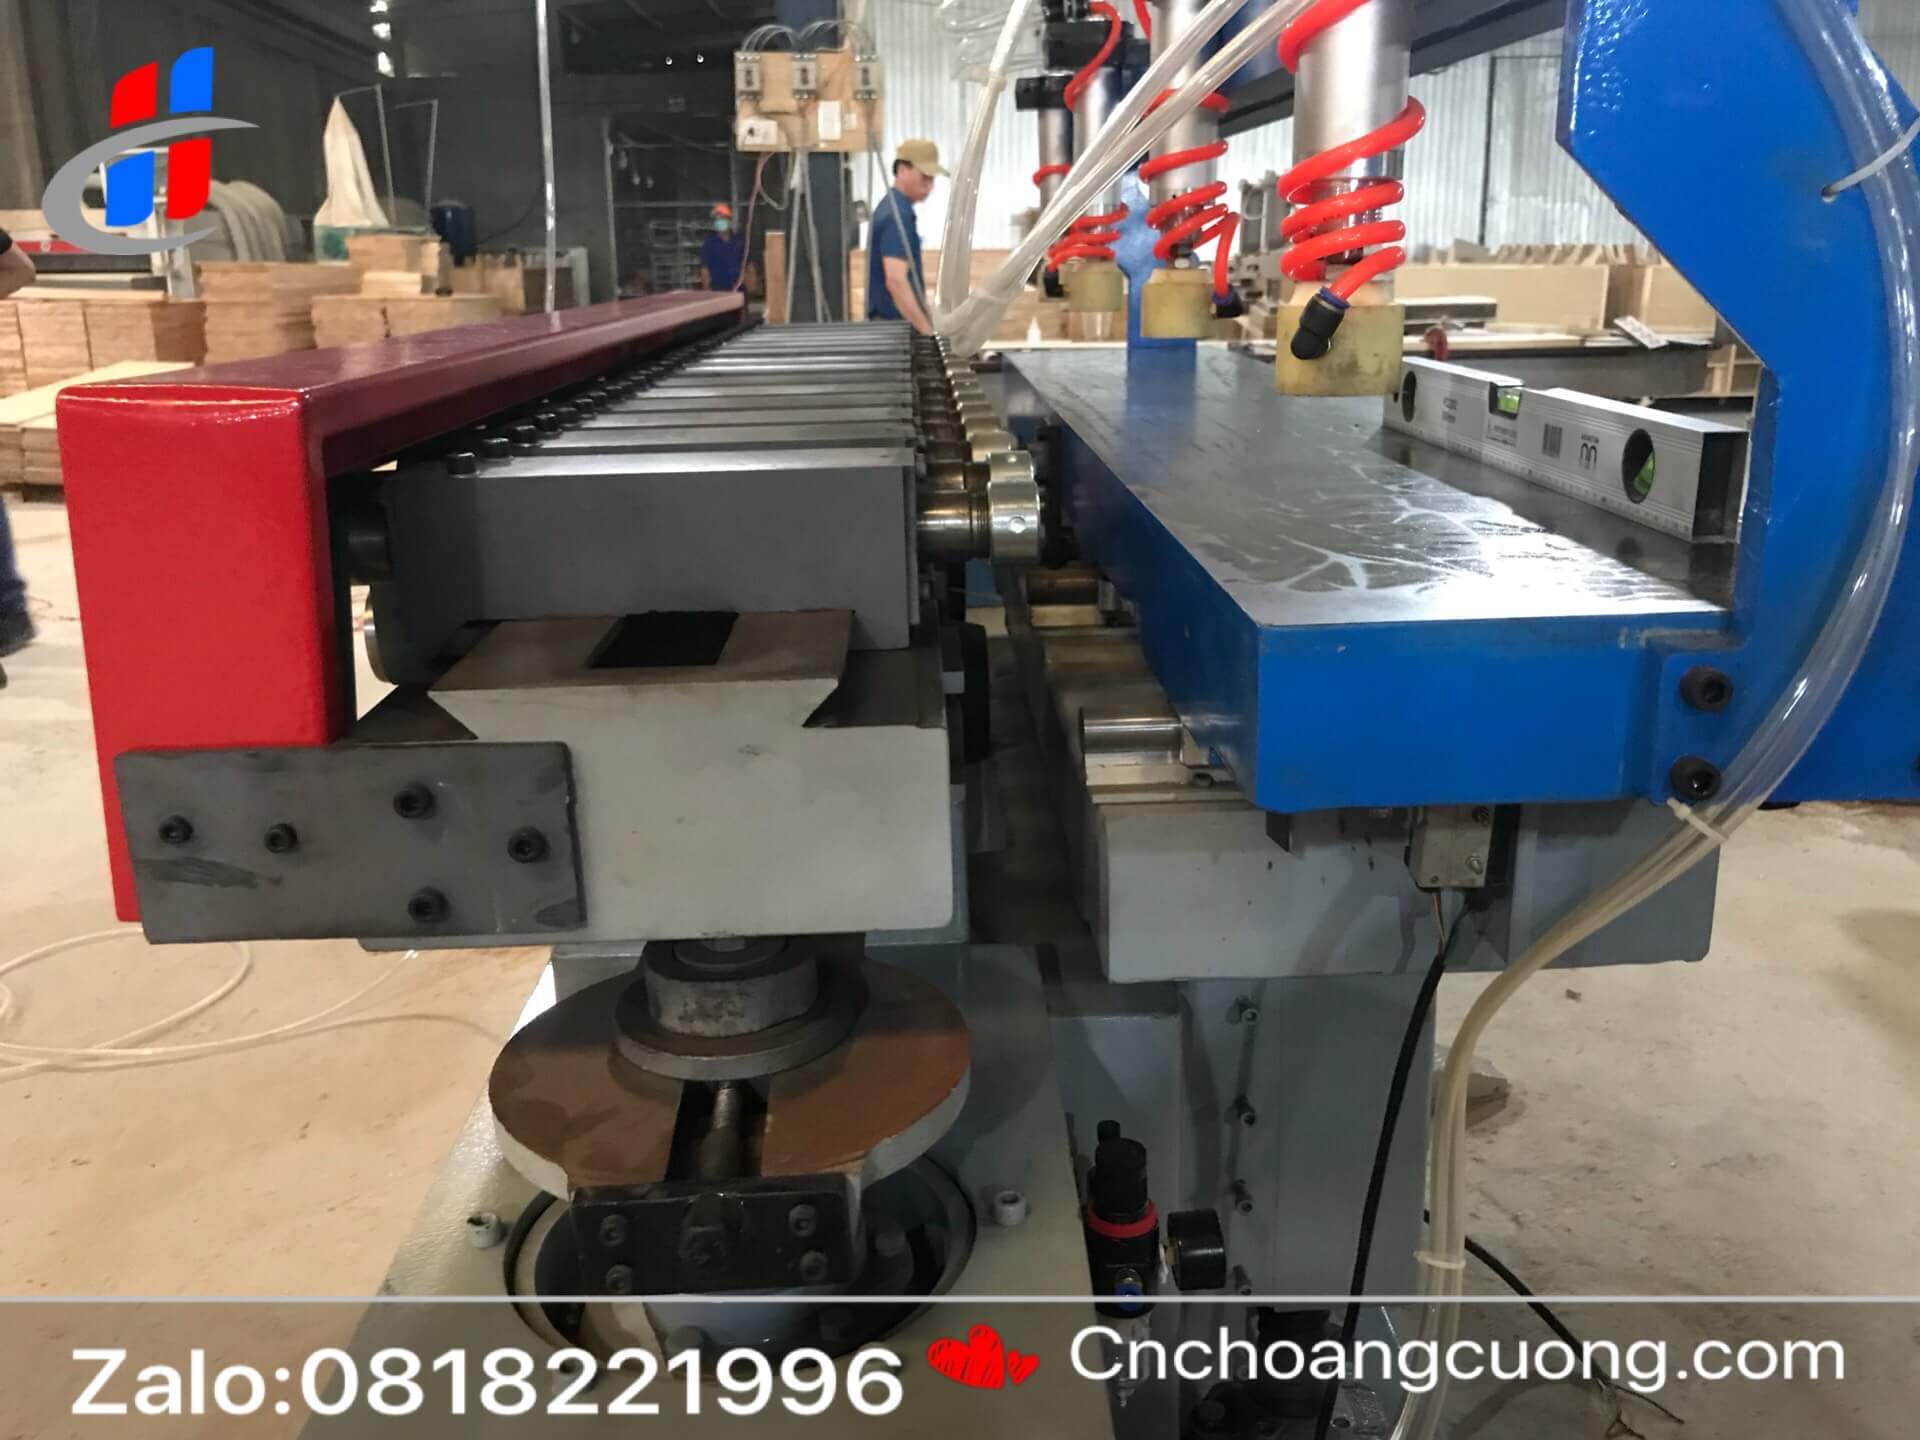 https://cnchoangcuong.com/?post_type=product&p=2934&preview=true